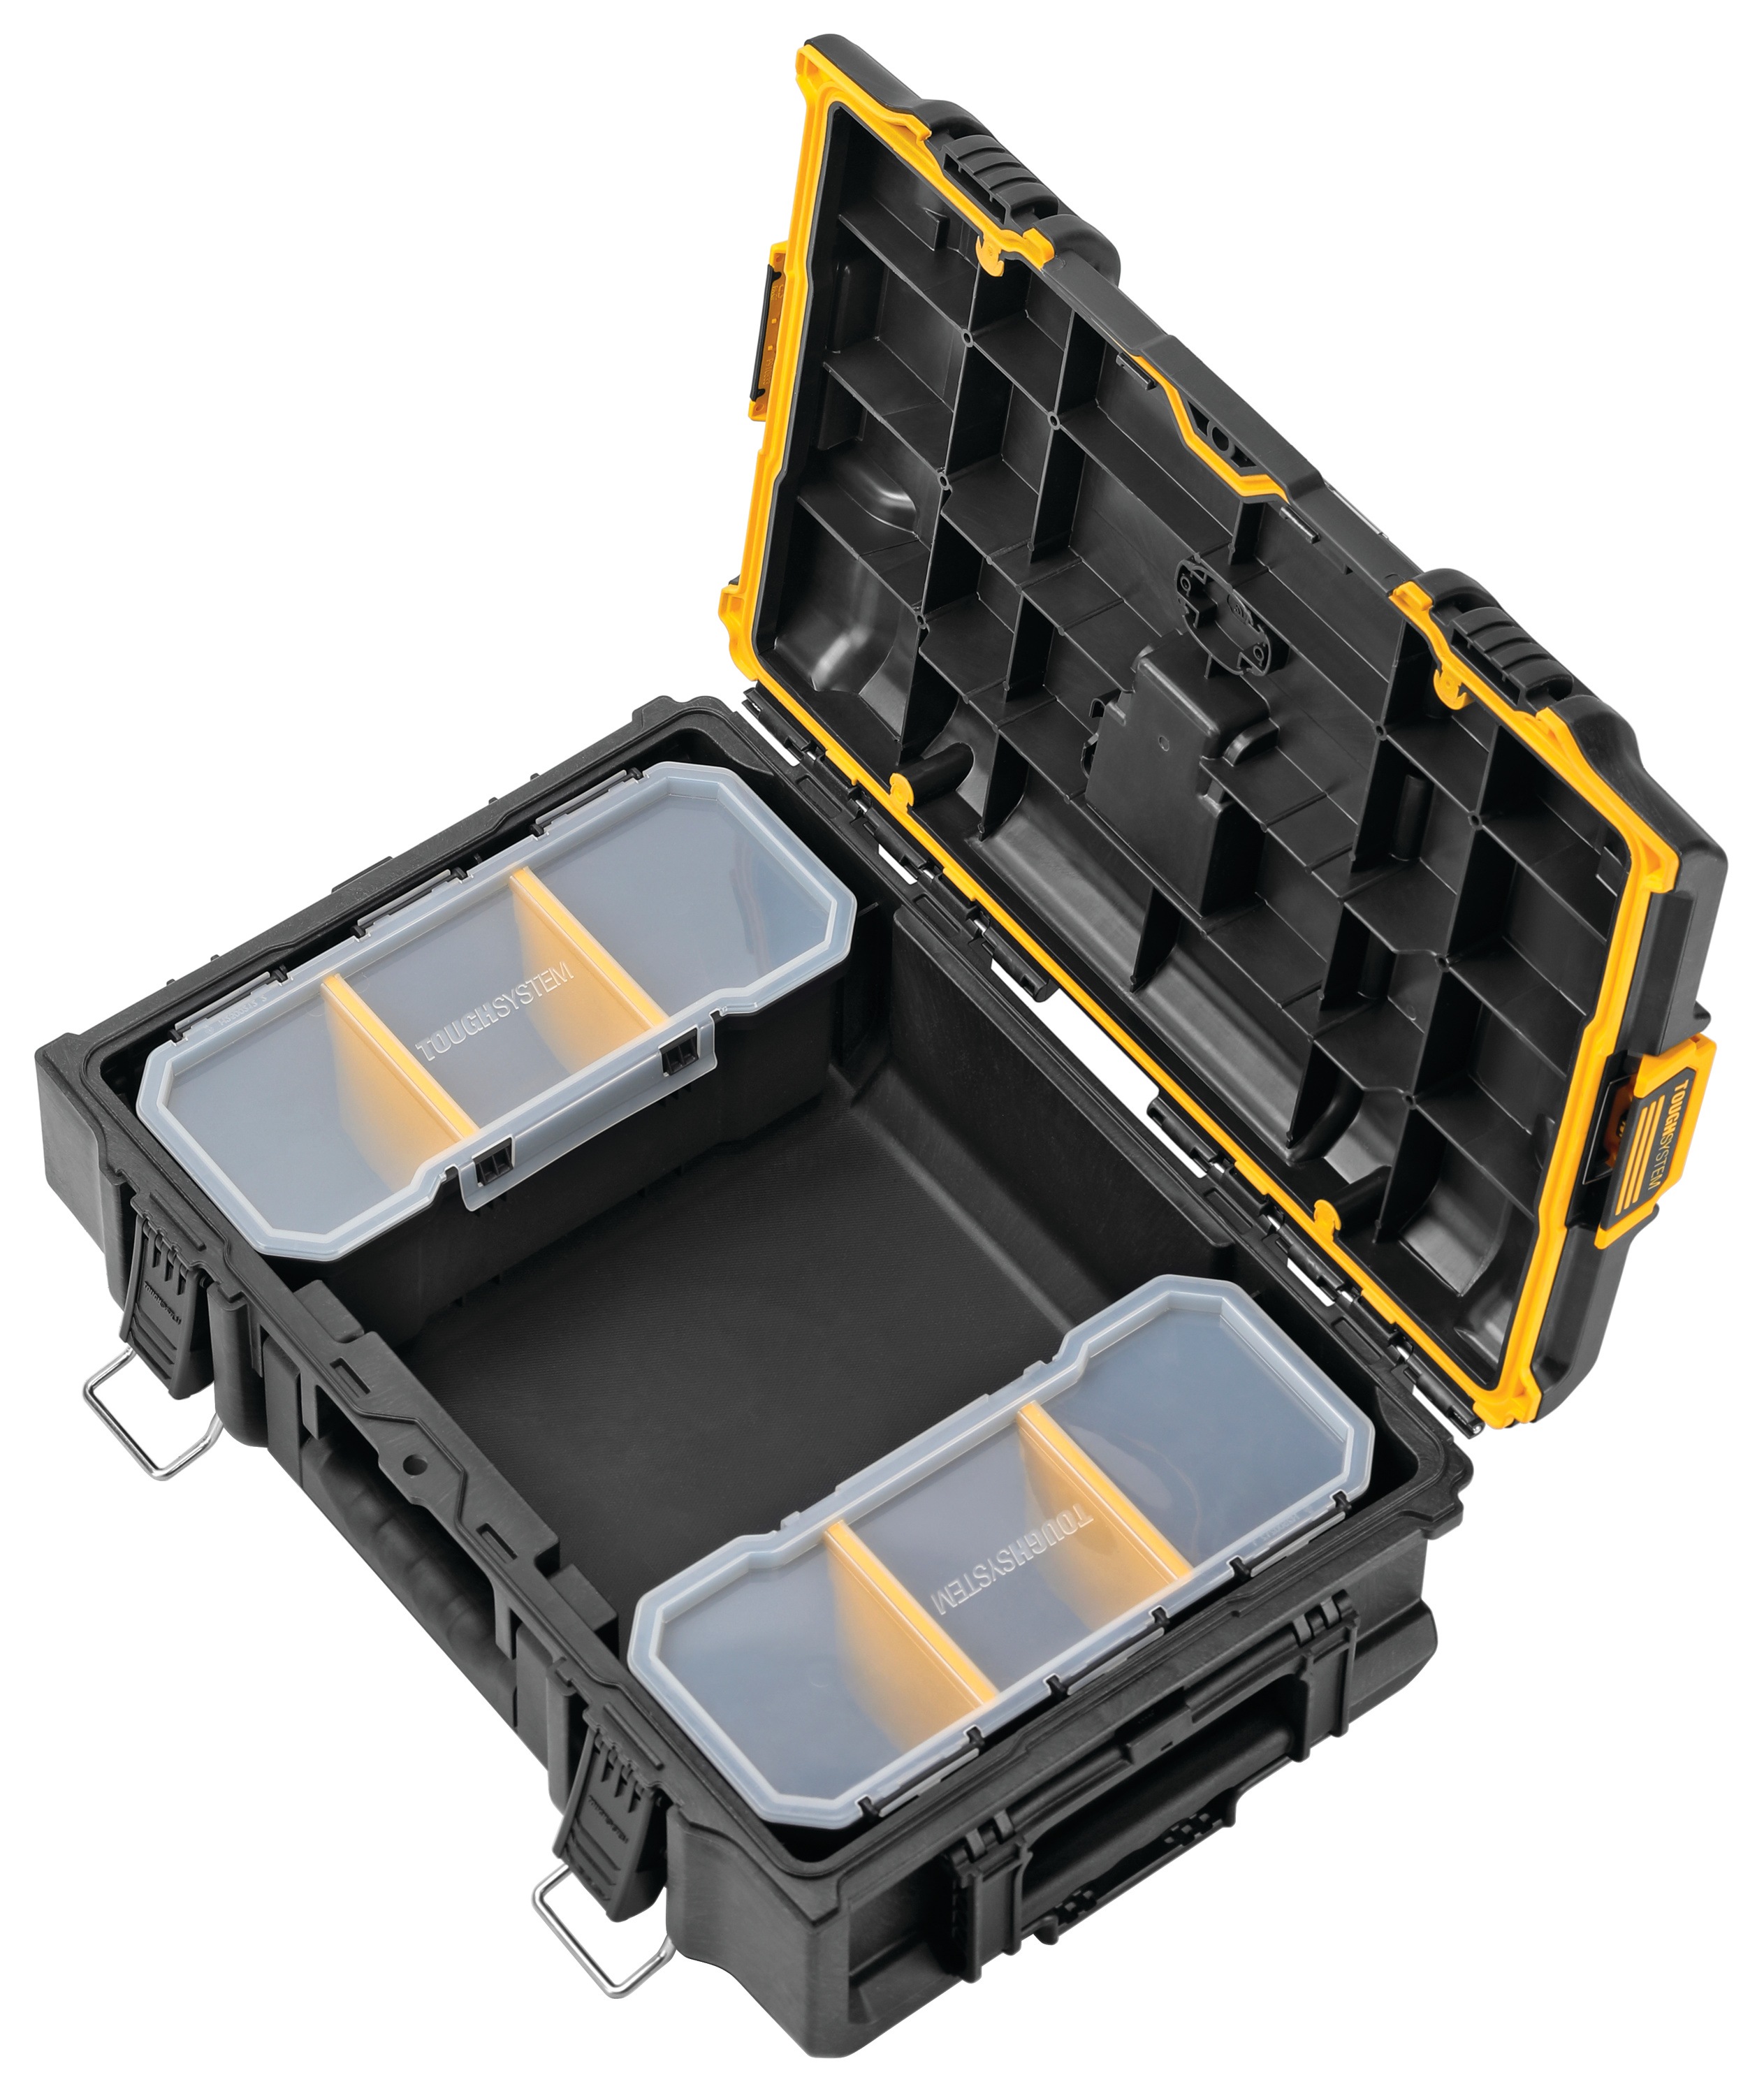 tough system 2.0 toolbox with lid open.